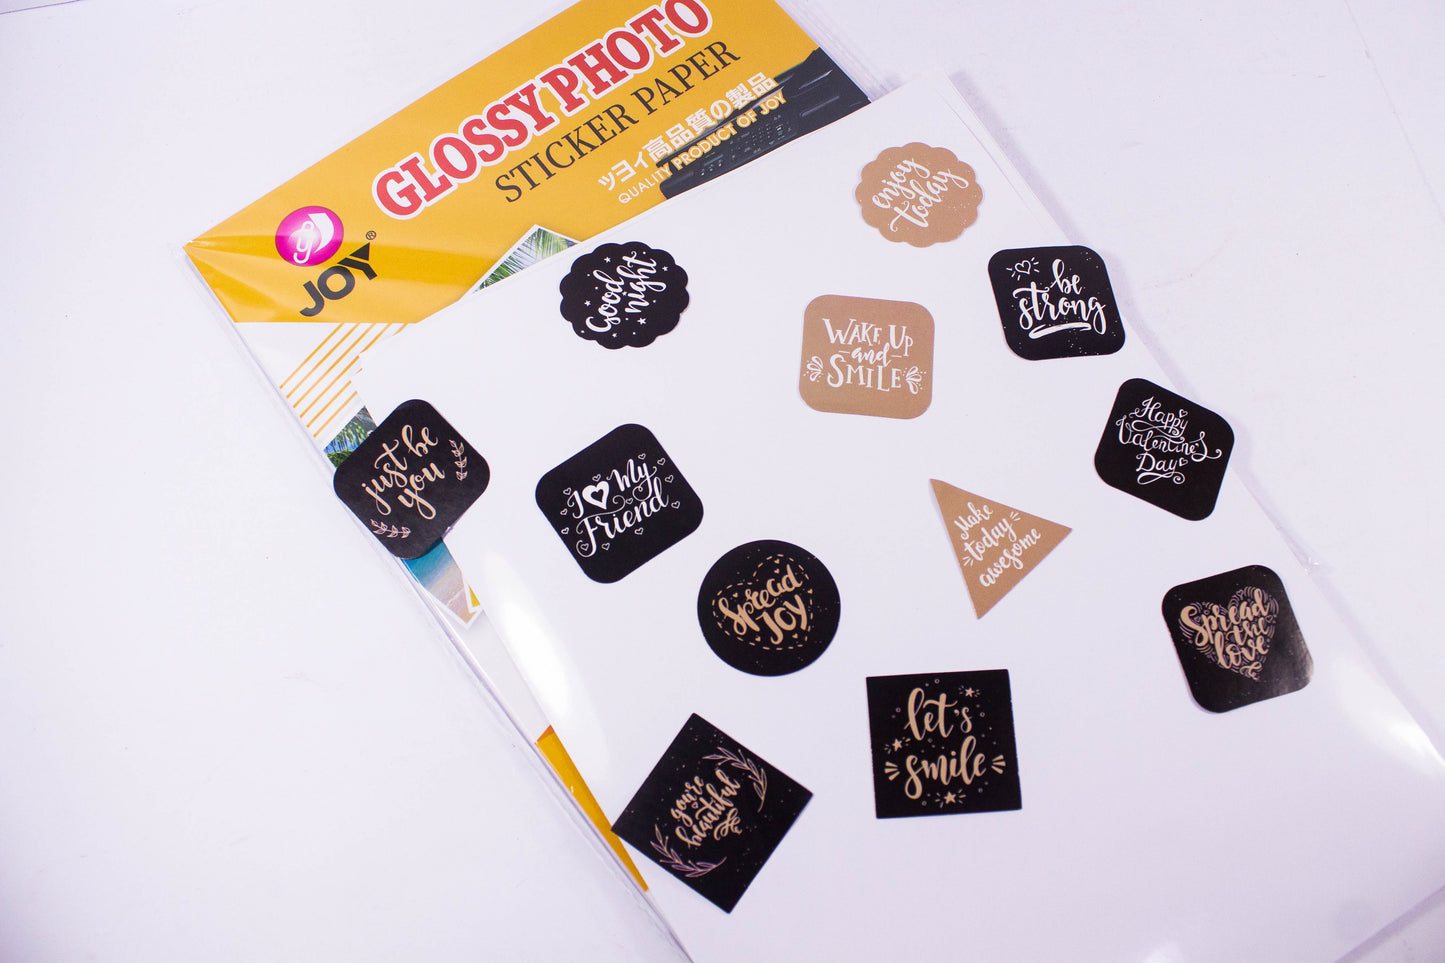 Joy Glossy Sticker Photopaper 135gsm A4 | Sold by 20s